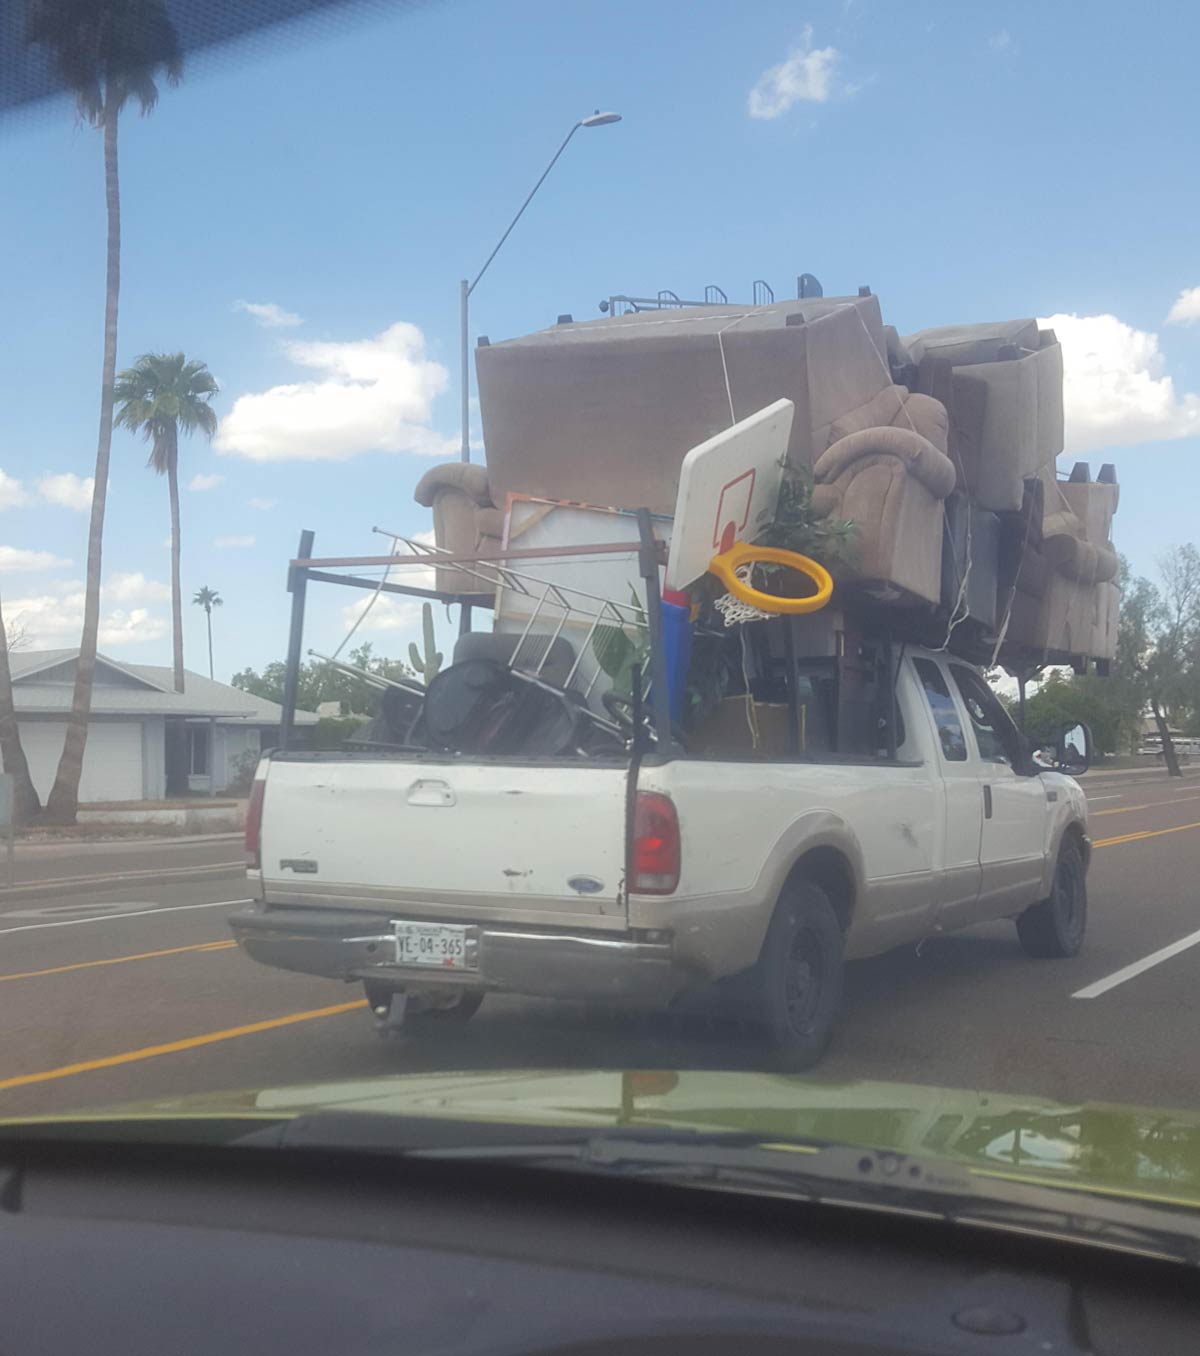 This truck has everything